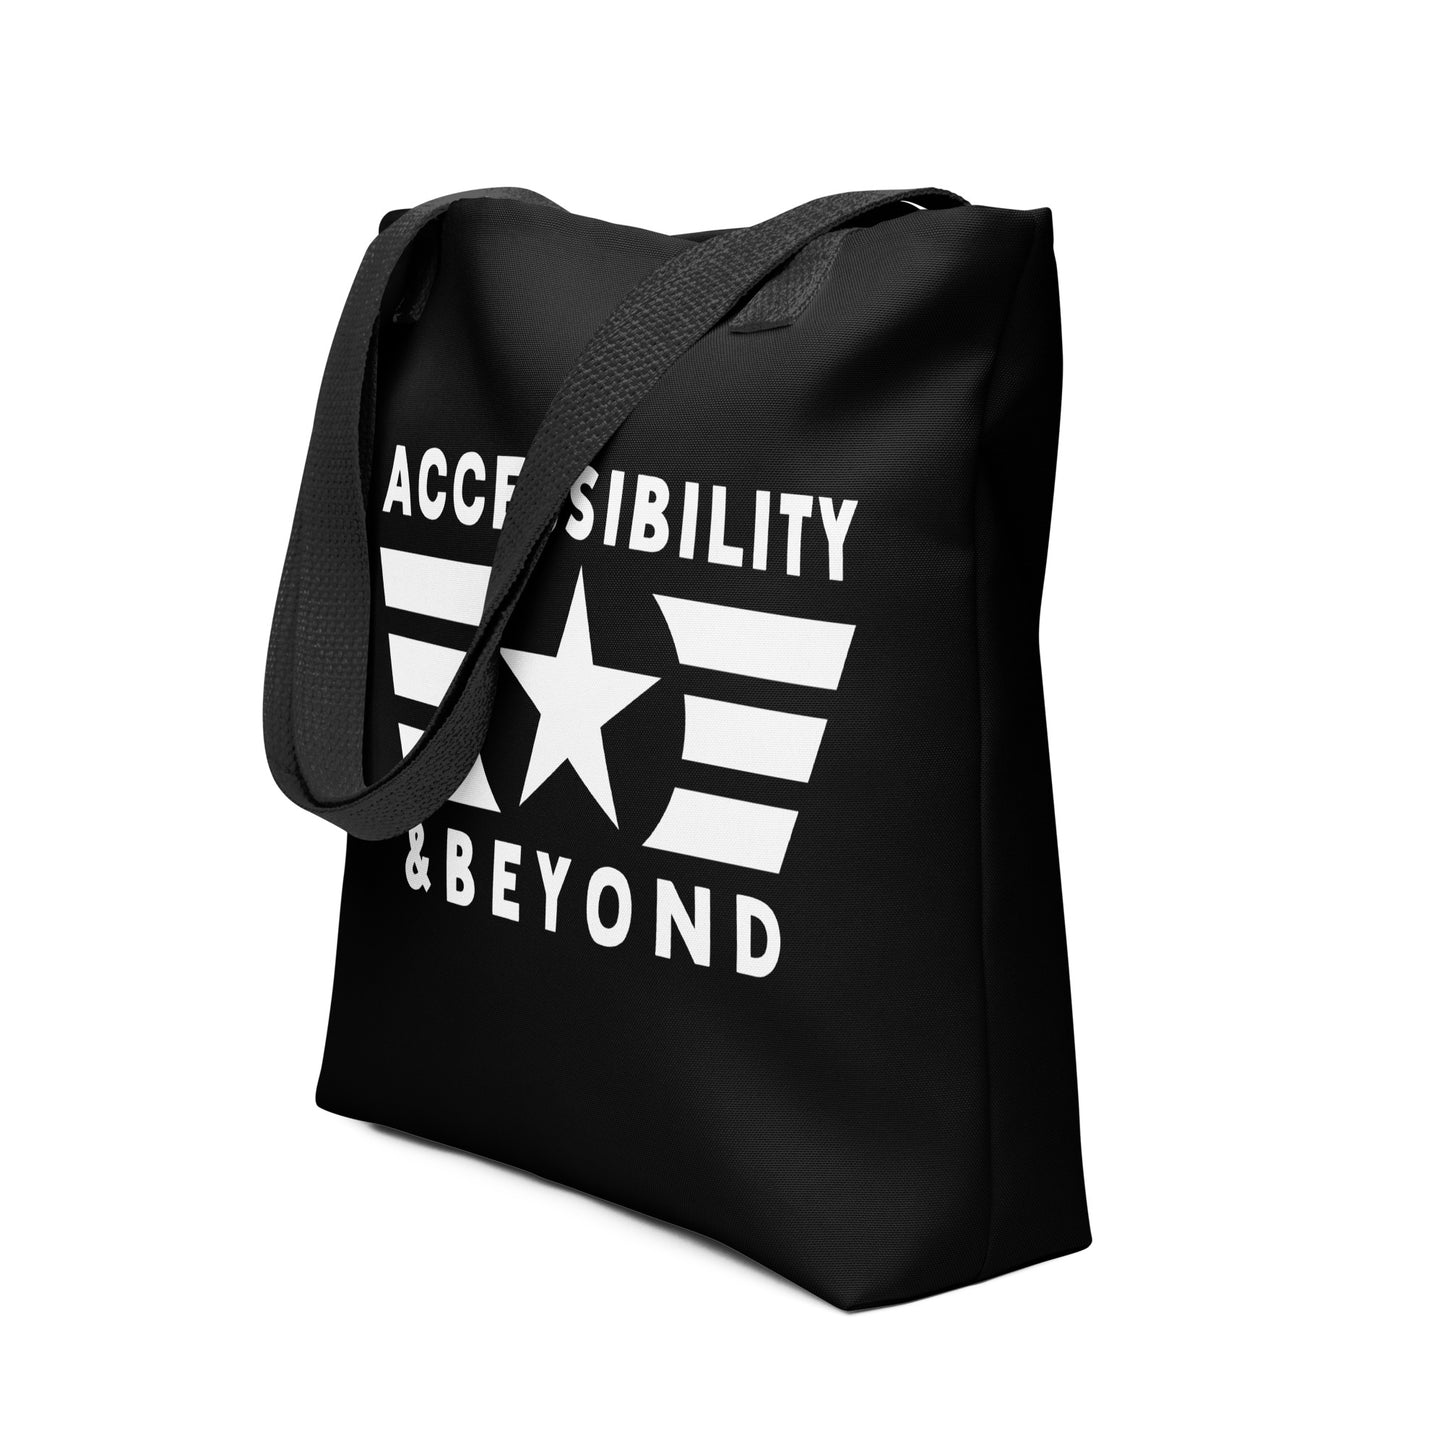 Accessibility and Beyond | Tote